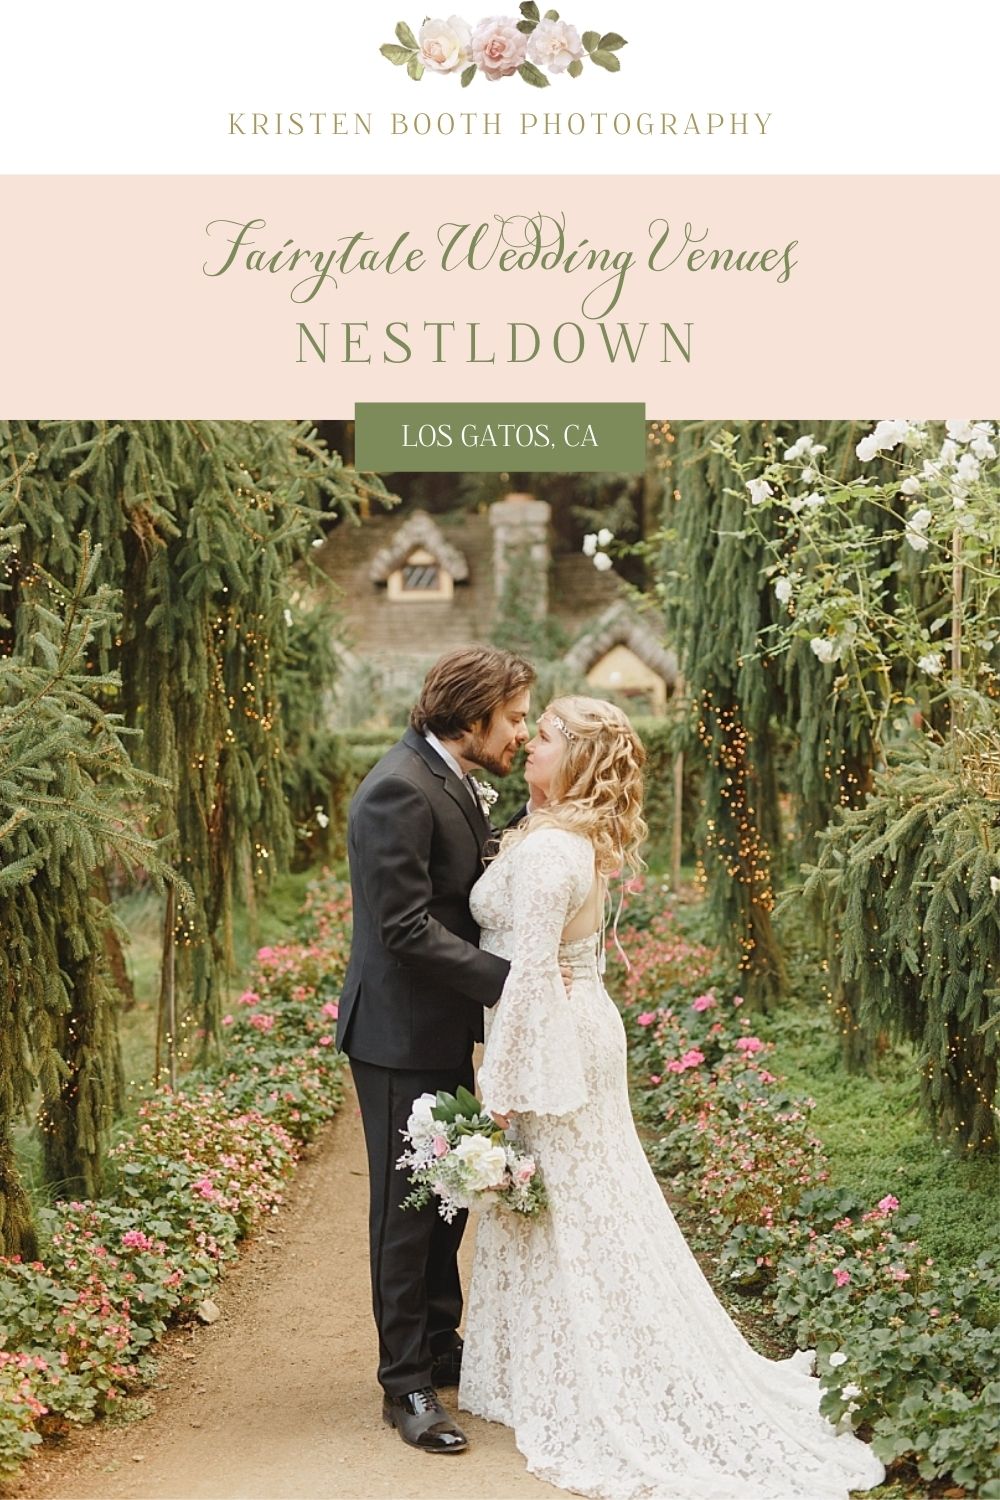 Venues for a fairytale inspired wedding in California